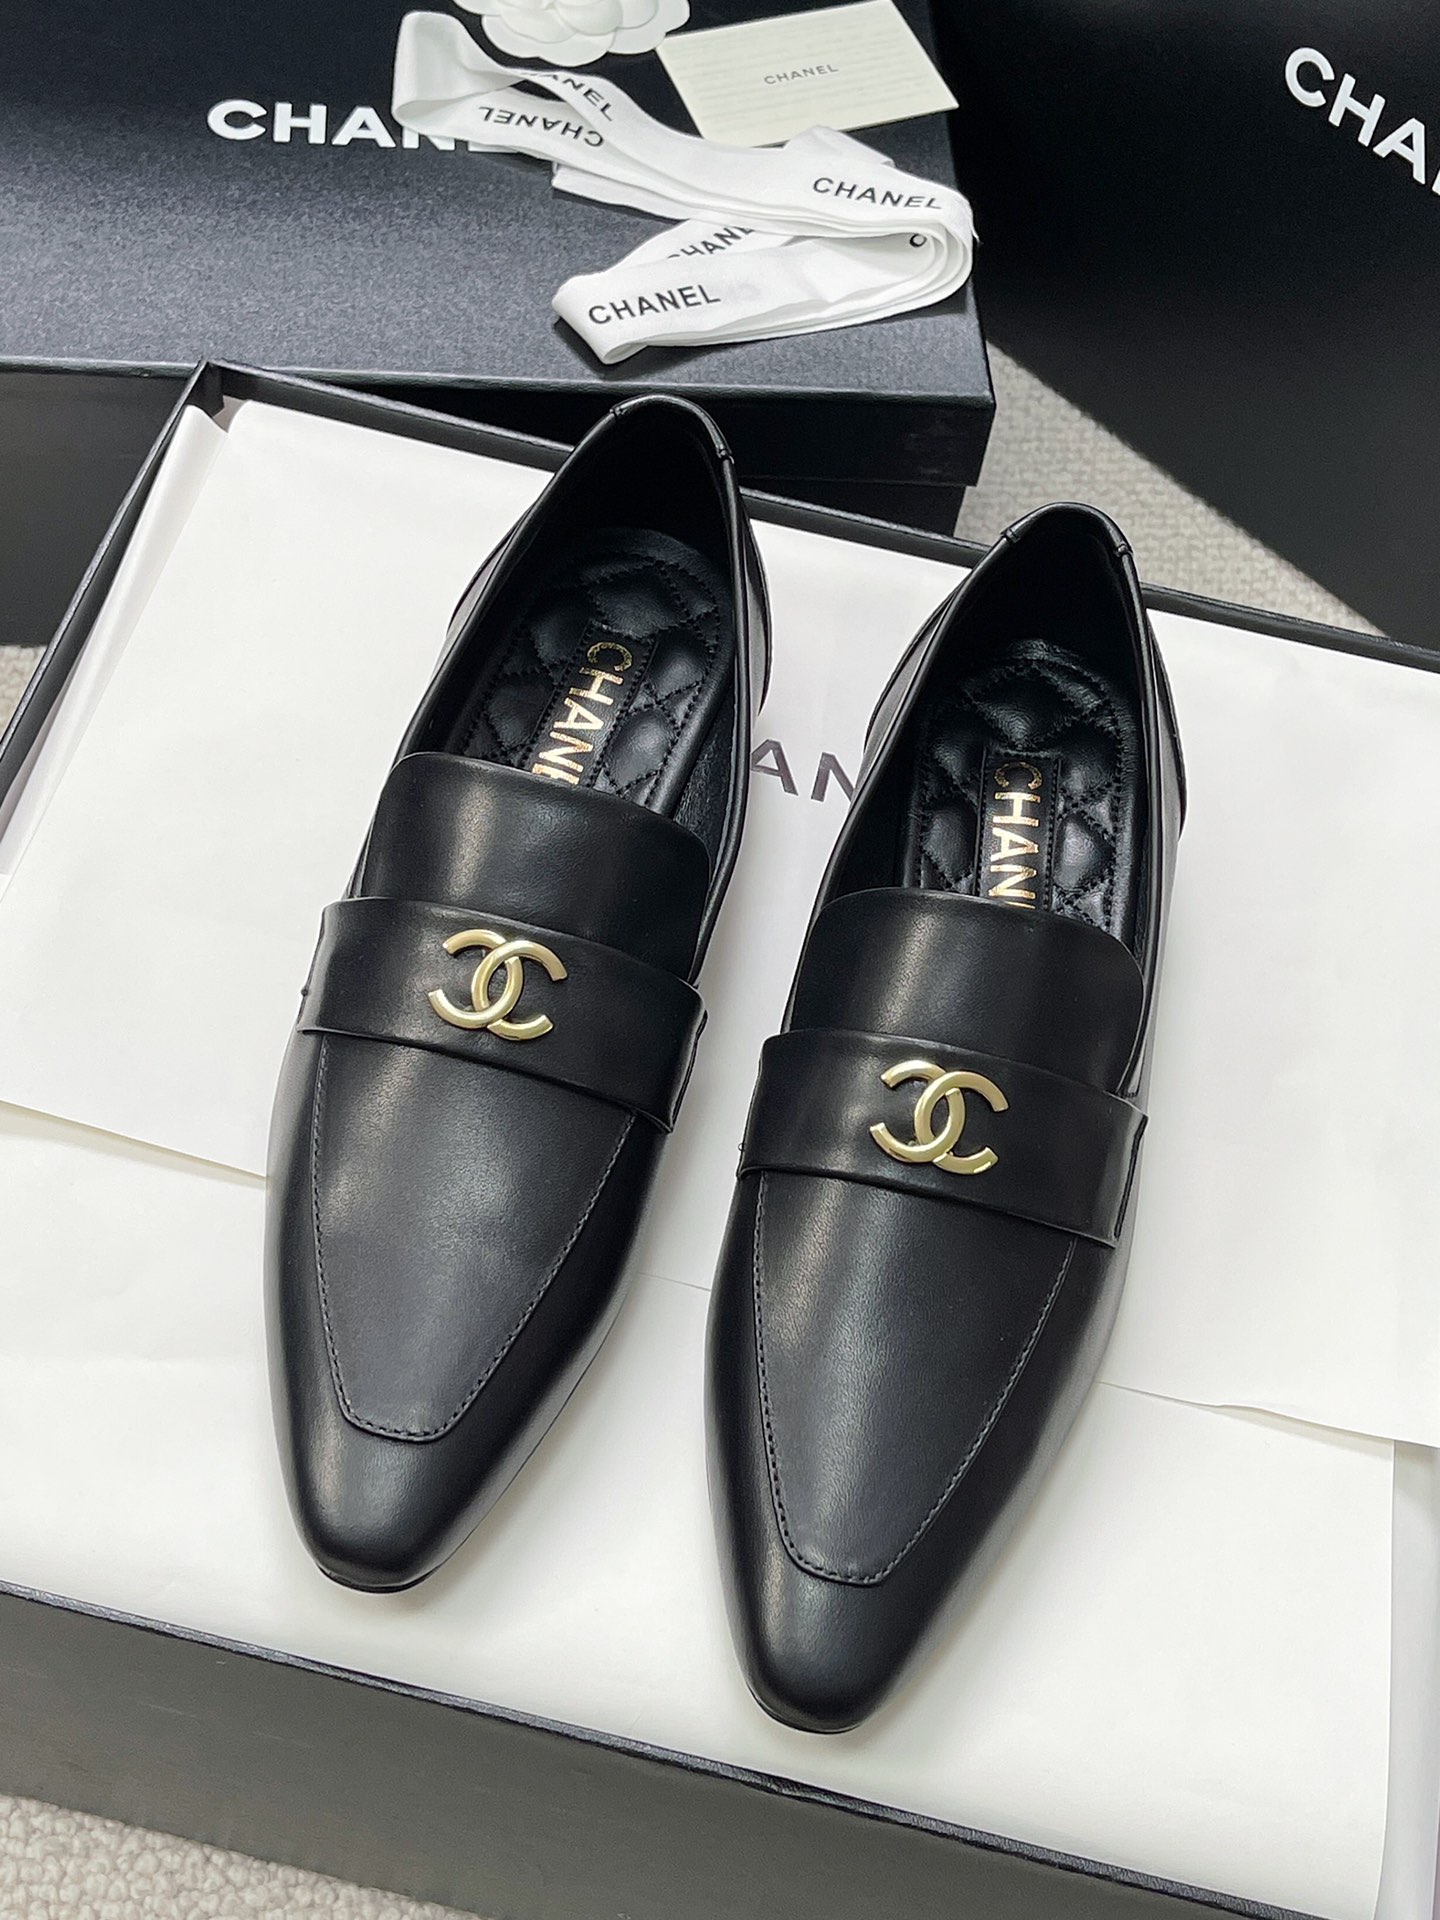 Chanel Shoes Loafers Genuine Leather Patent Sheepskin